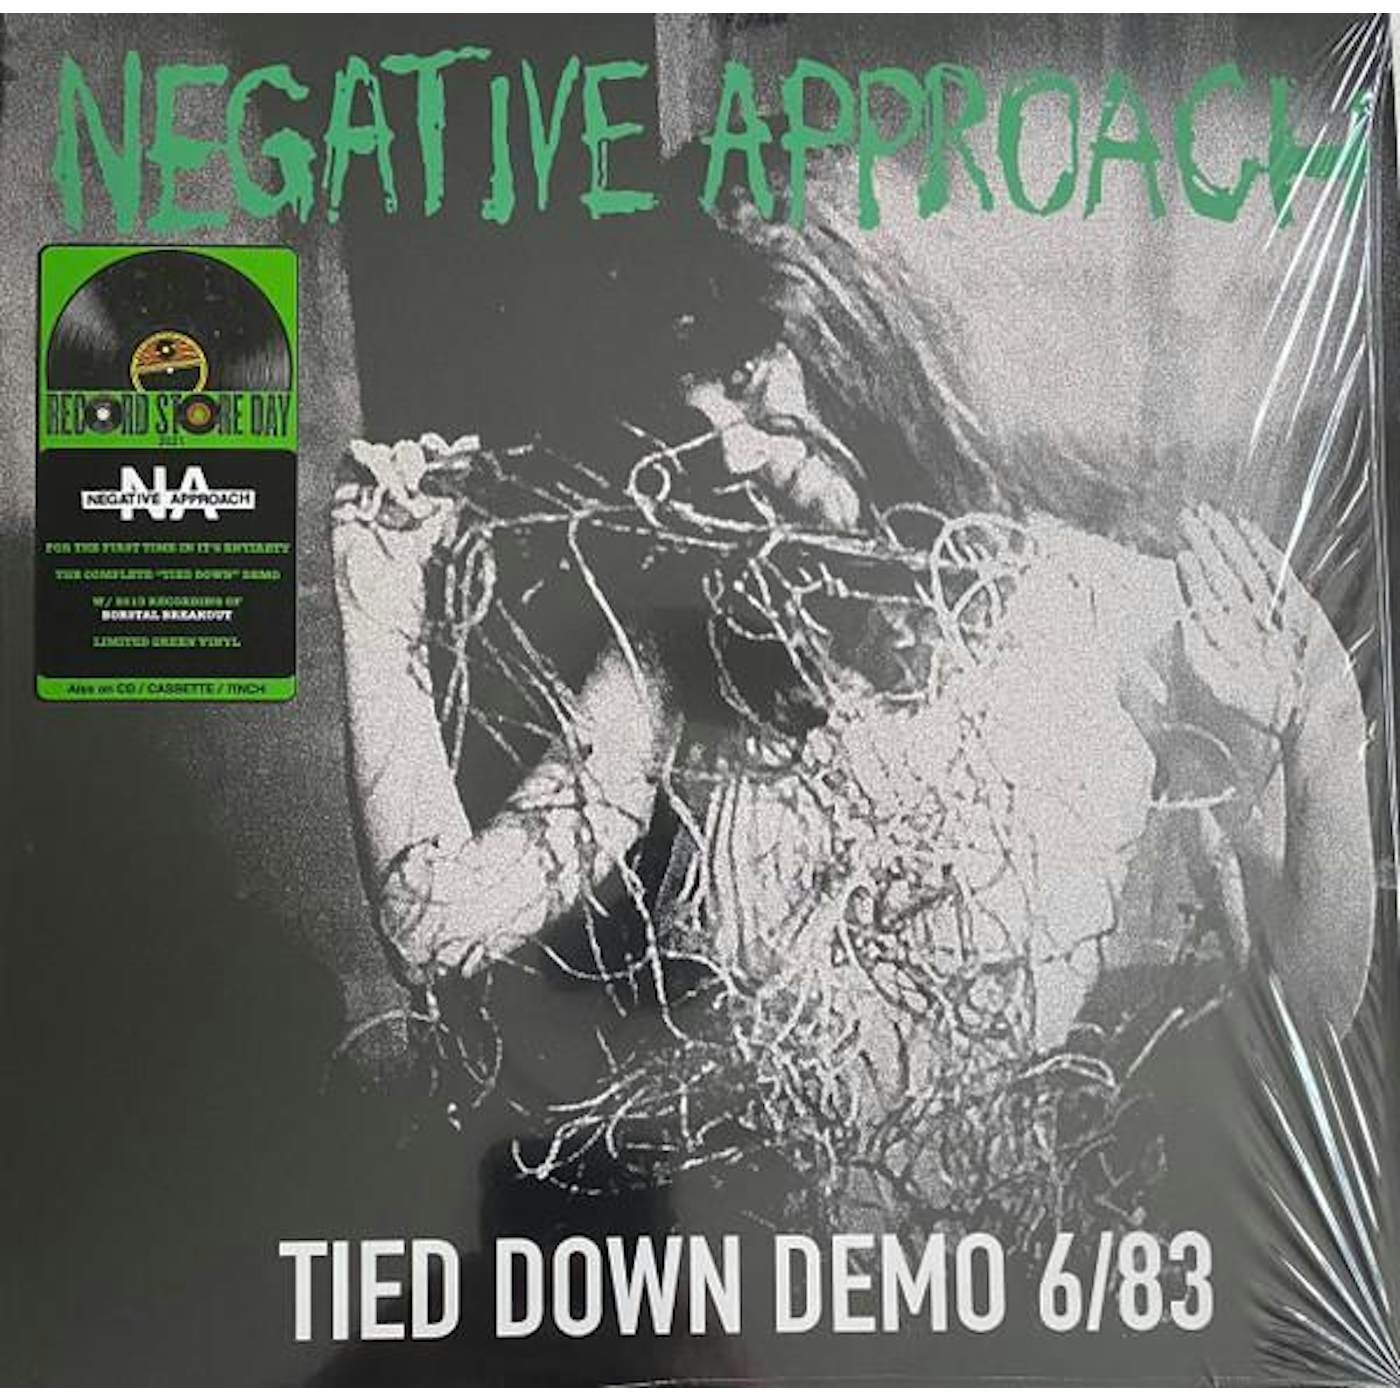 Negative Approach TIED DOWN DEMO 6/83 CD